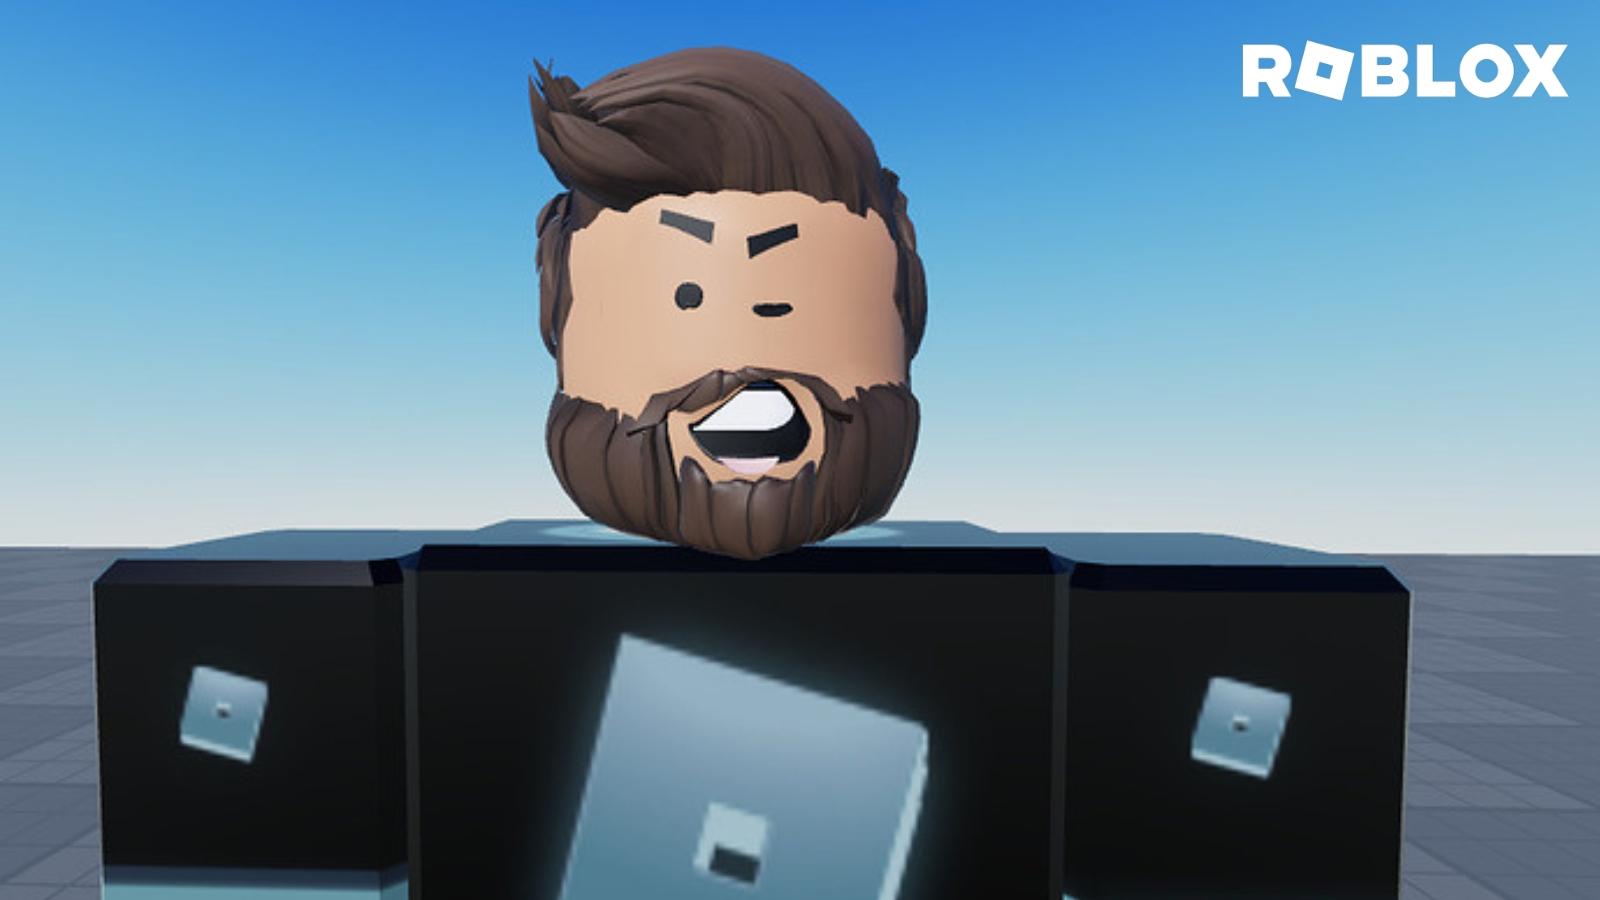 I Think Roblox now Adds replacements for the Faces you've bought